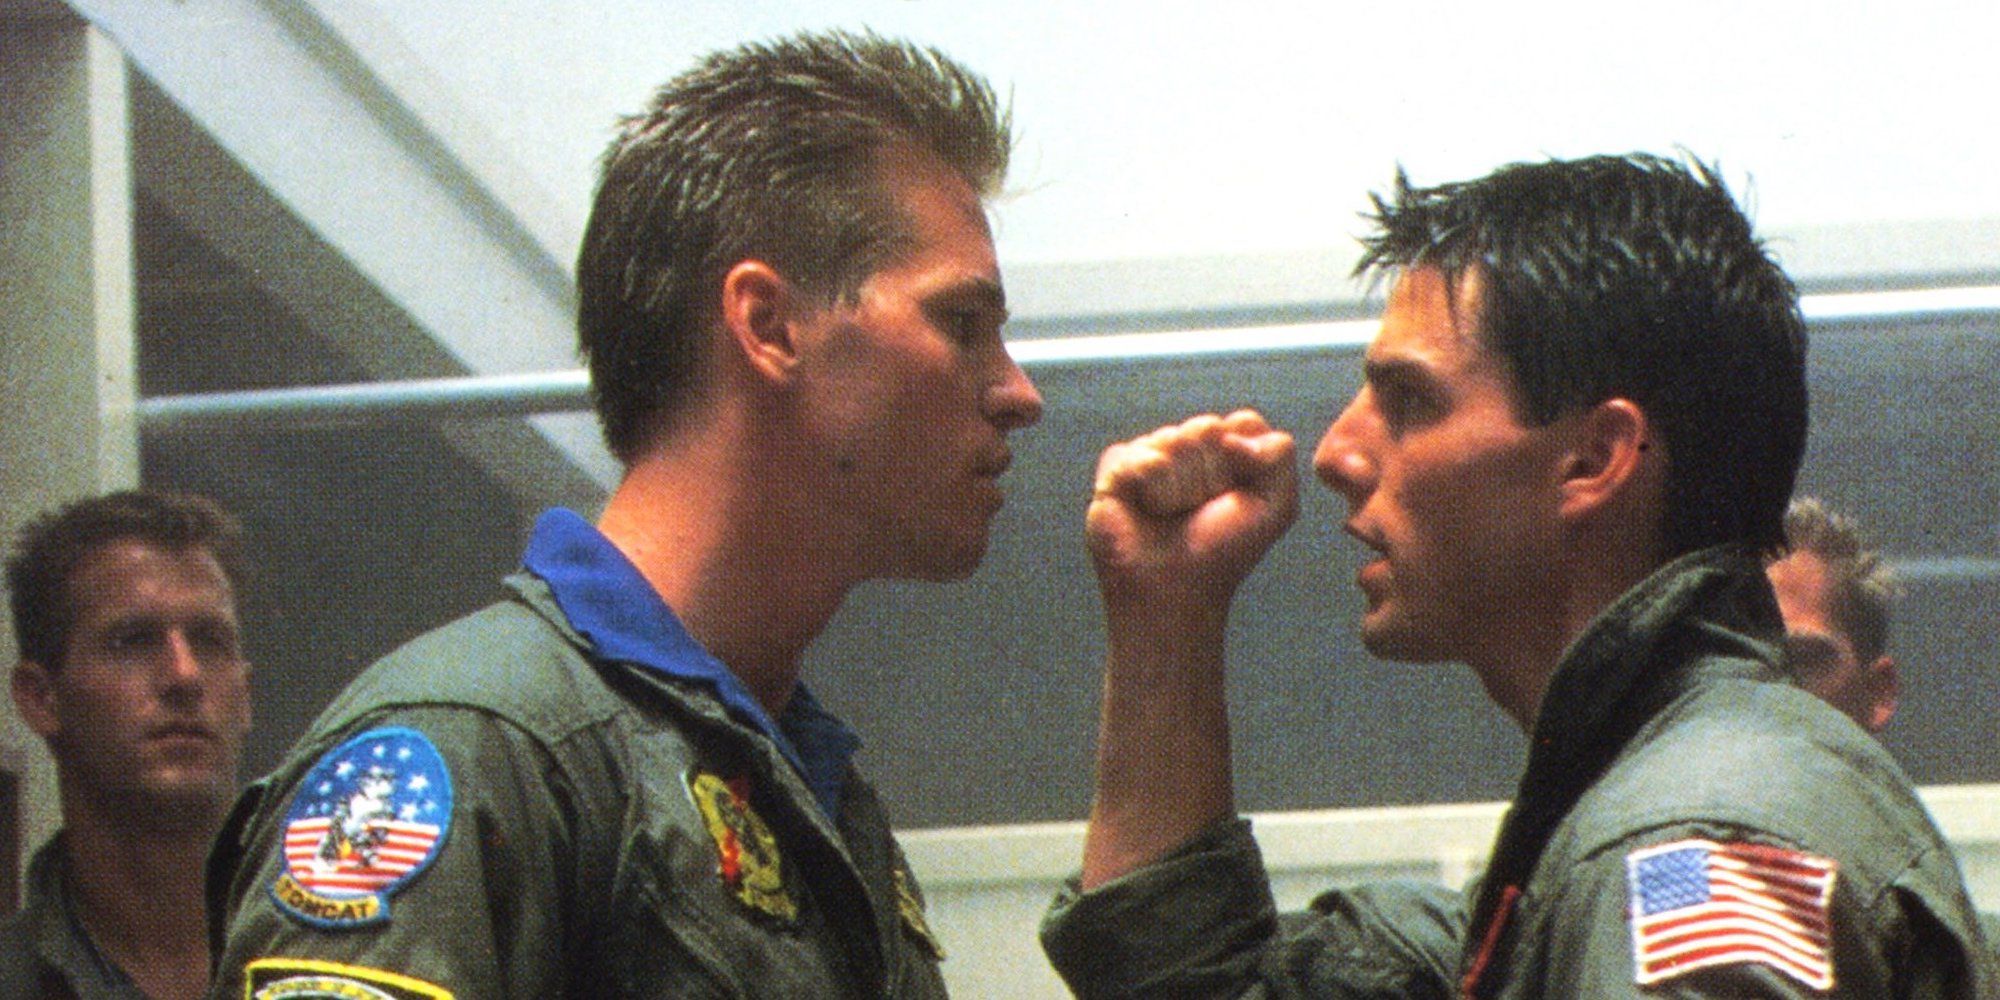 Top Gun Ending Explained: Maverick's Dad, Goose's Dog Tags & Real Meaning